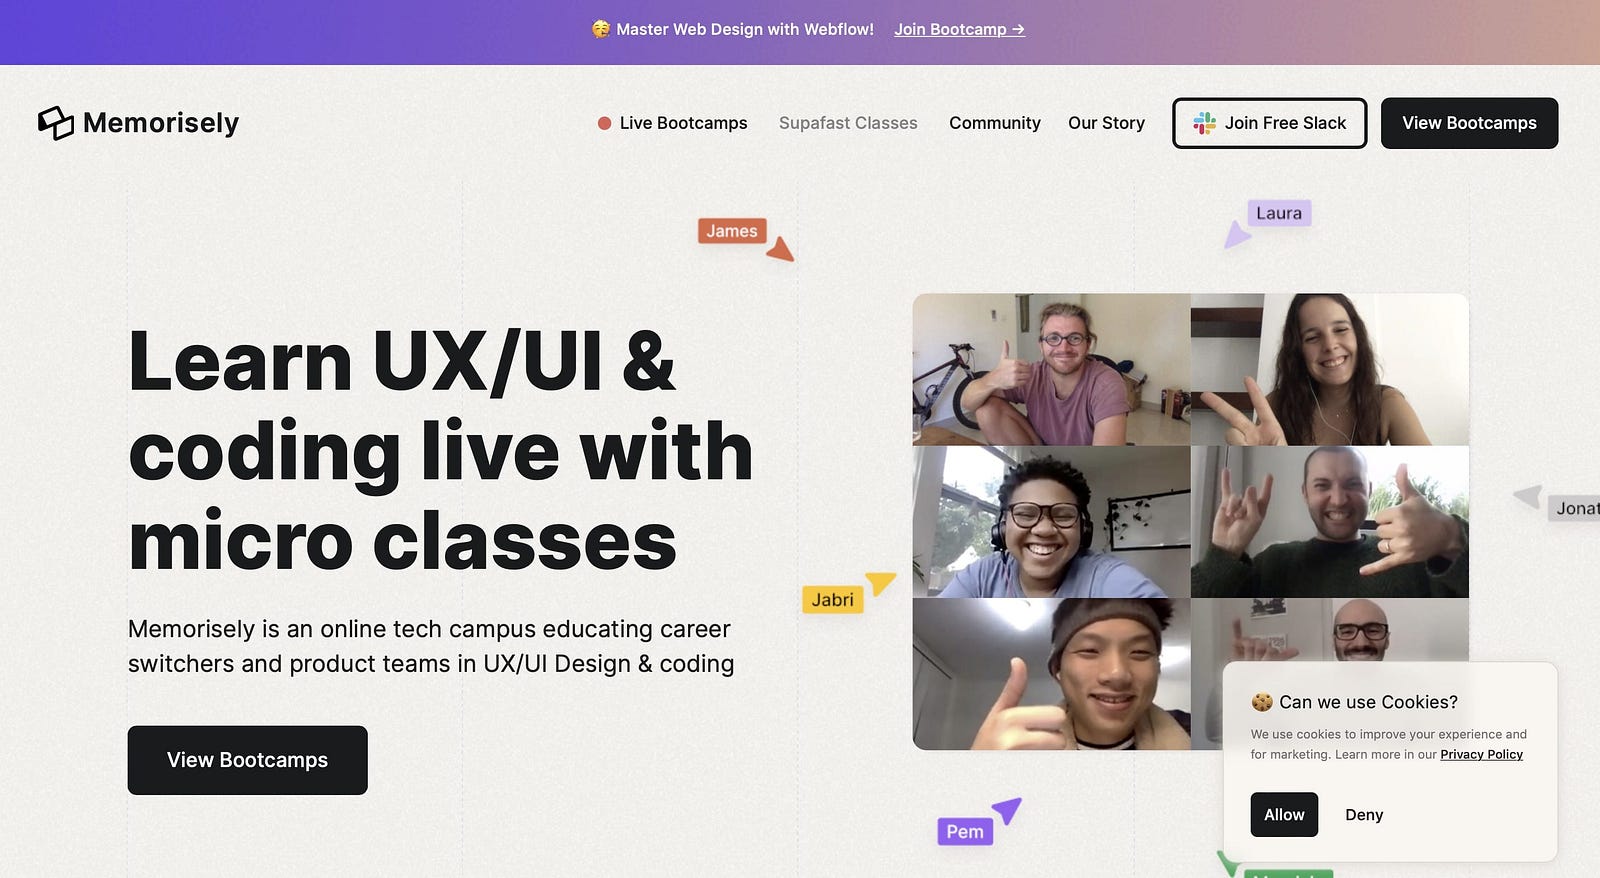 The homepage of Memorisely, a design bootcamp